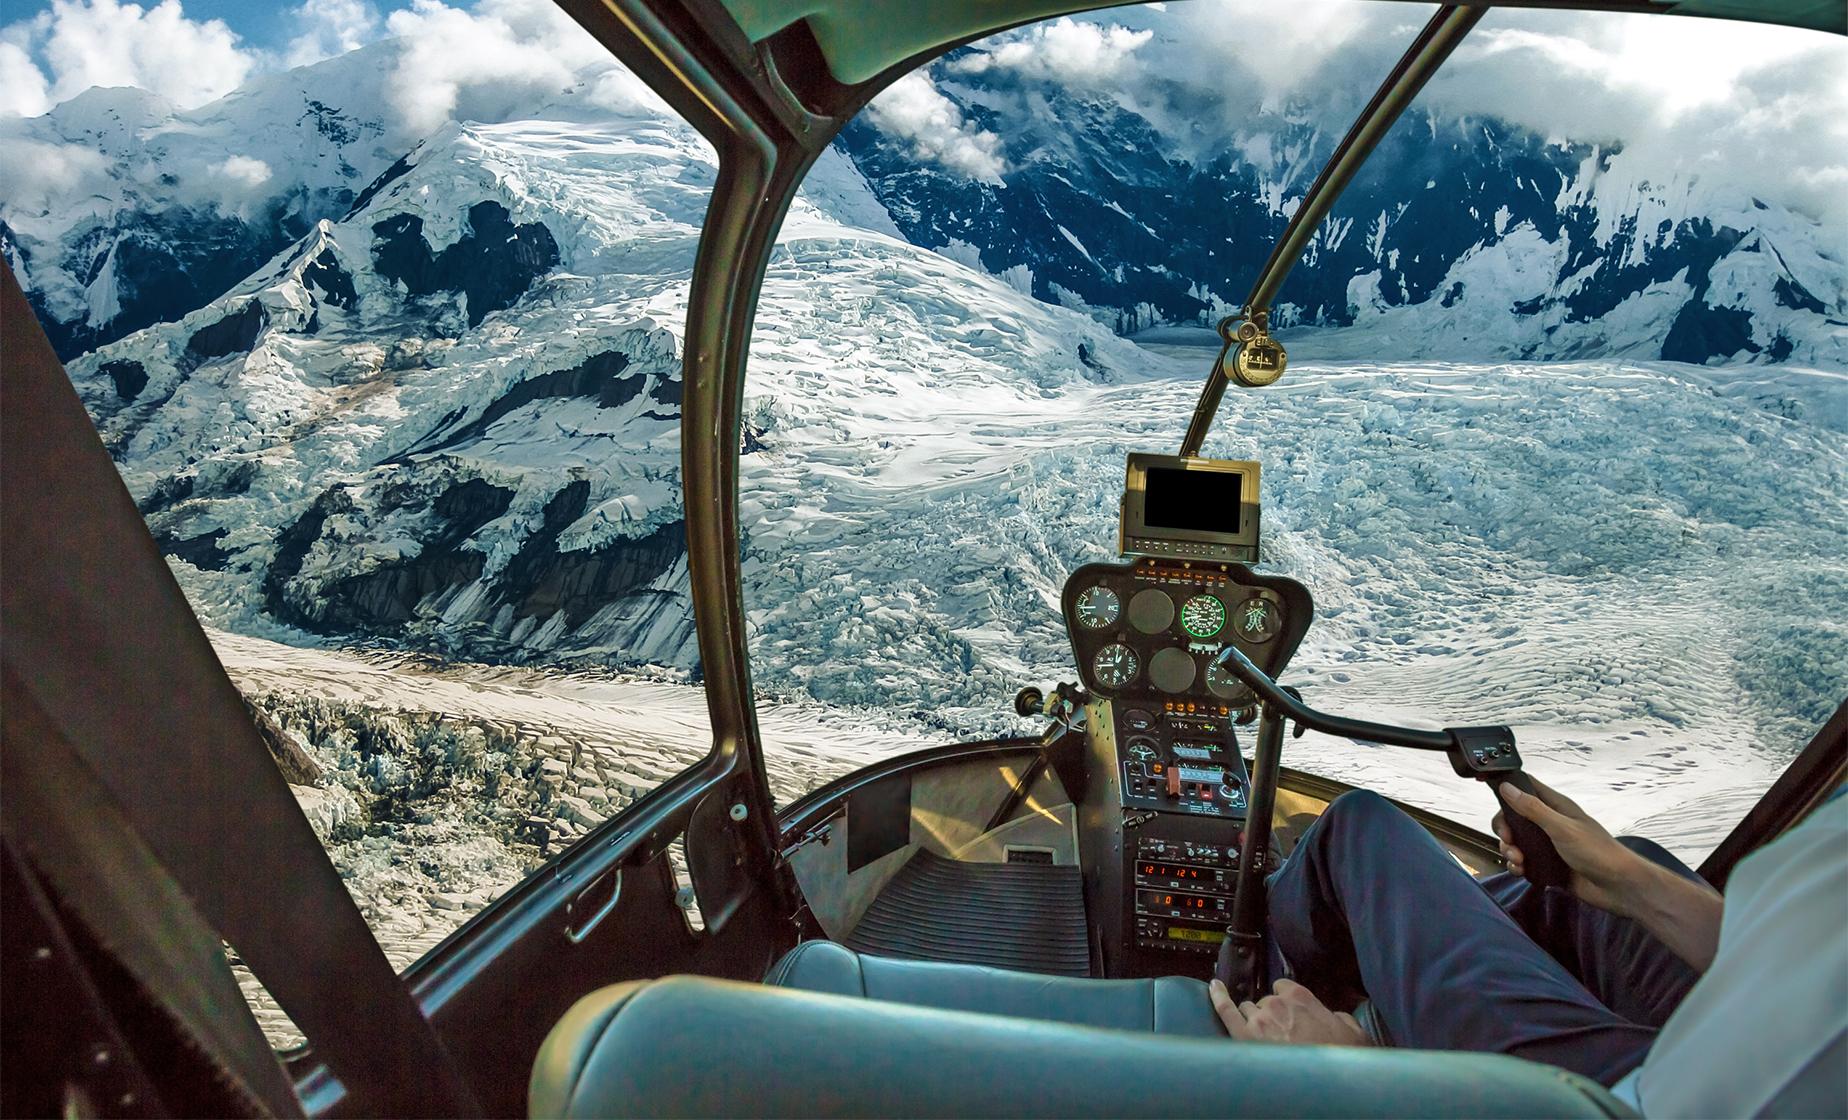 Helicopter Day Tour over the Alaska Mountain Range in Denali National Park